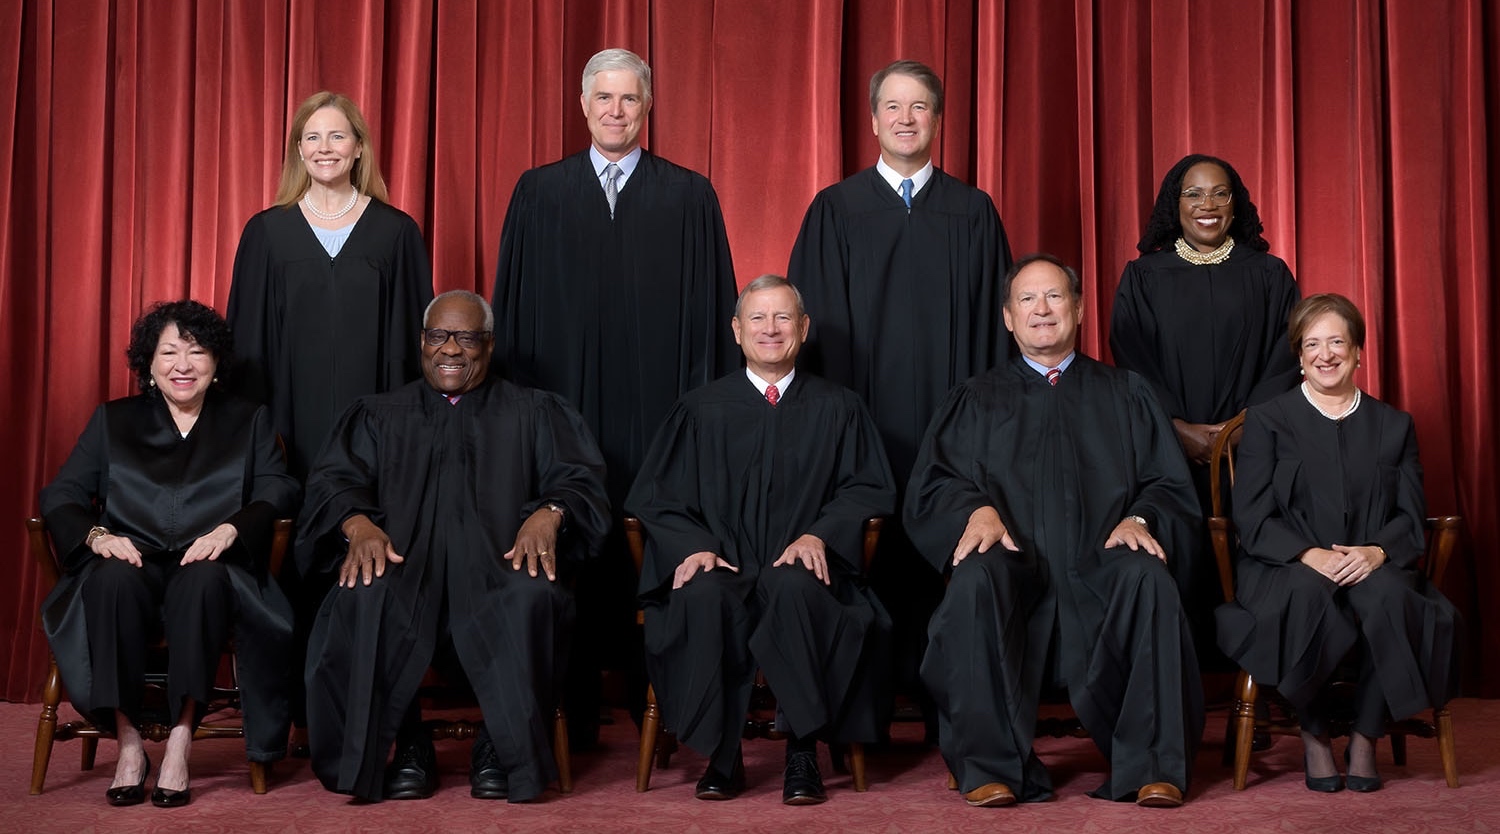 The Supreme Court as of June 30, 2022. (Fred Schilling, Collection of the Supreme Court of the United States)